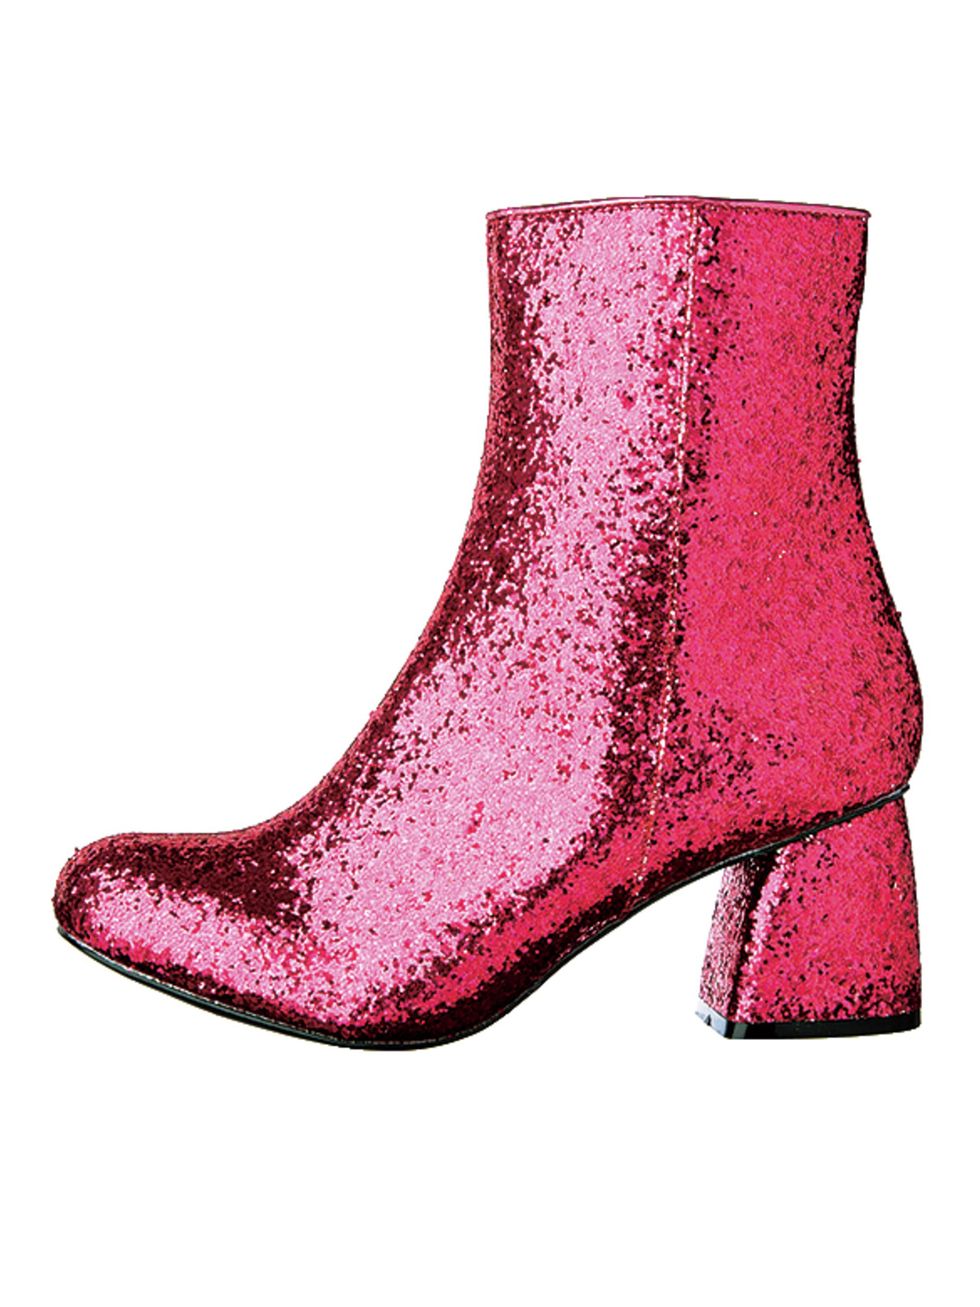 Red, Boot, Pink, Magenta, Carmine, Maroon, Leather, Fashion design, Synthetic rubber, 